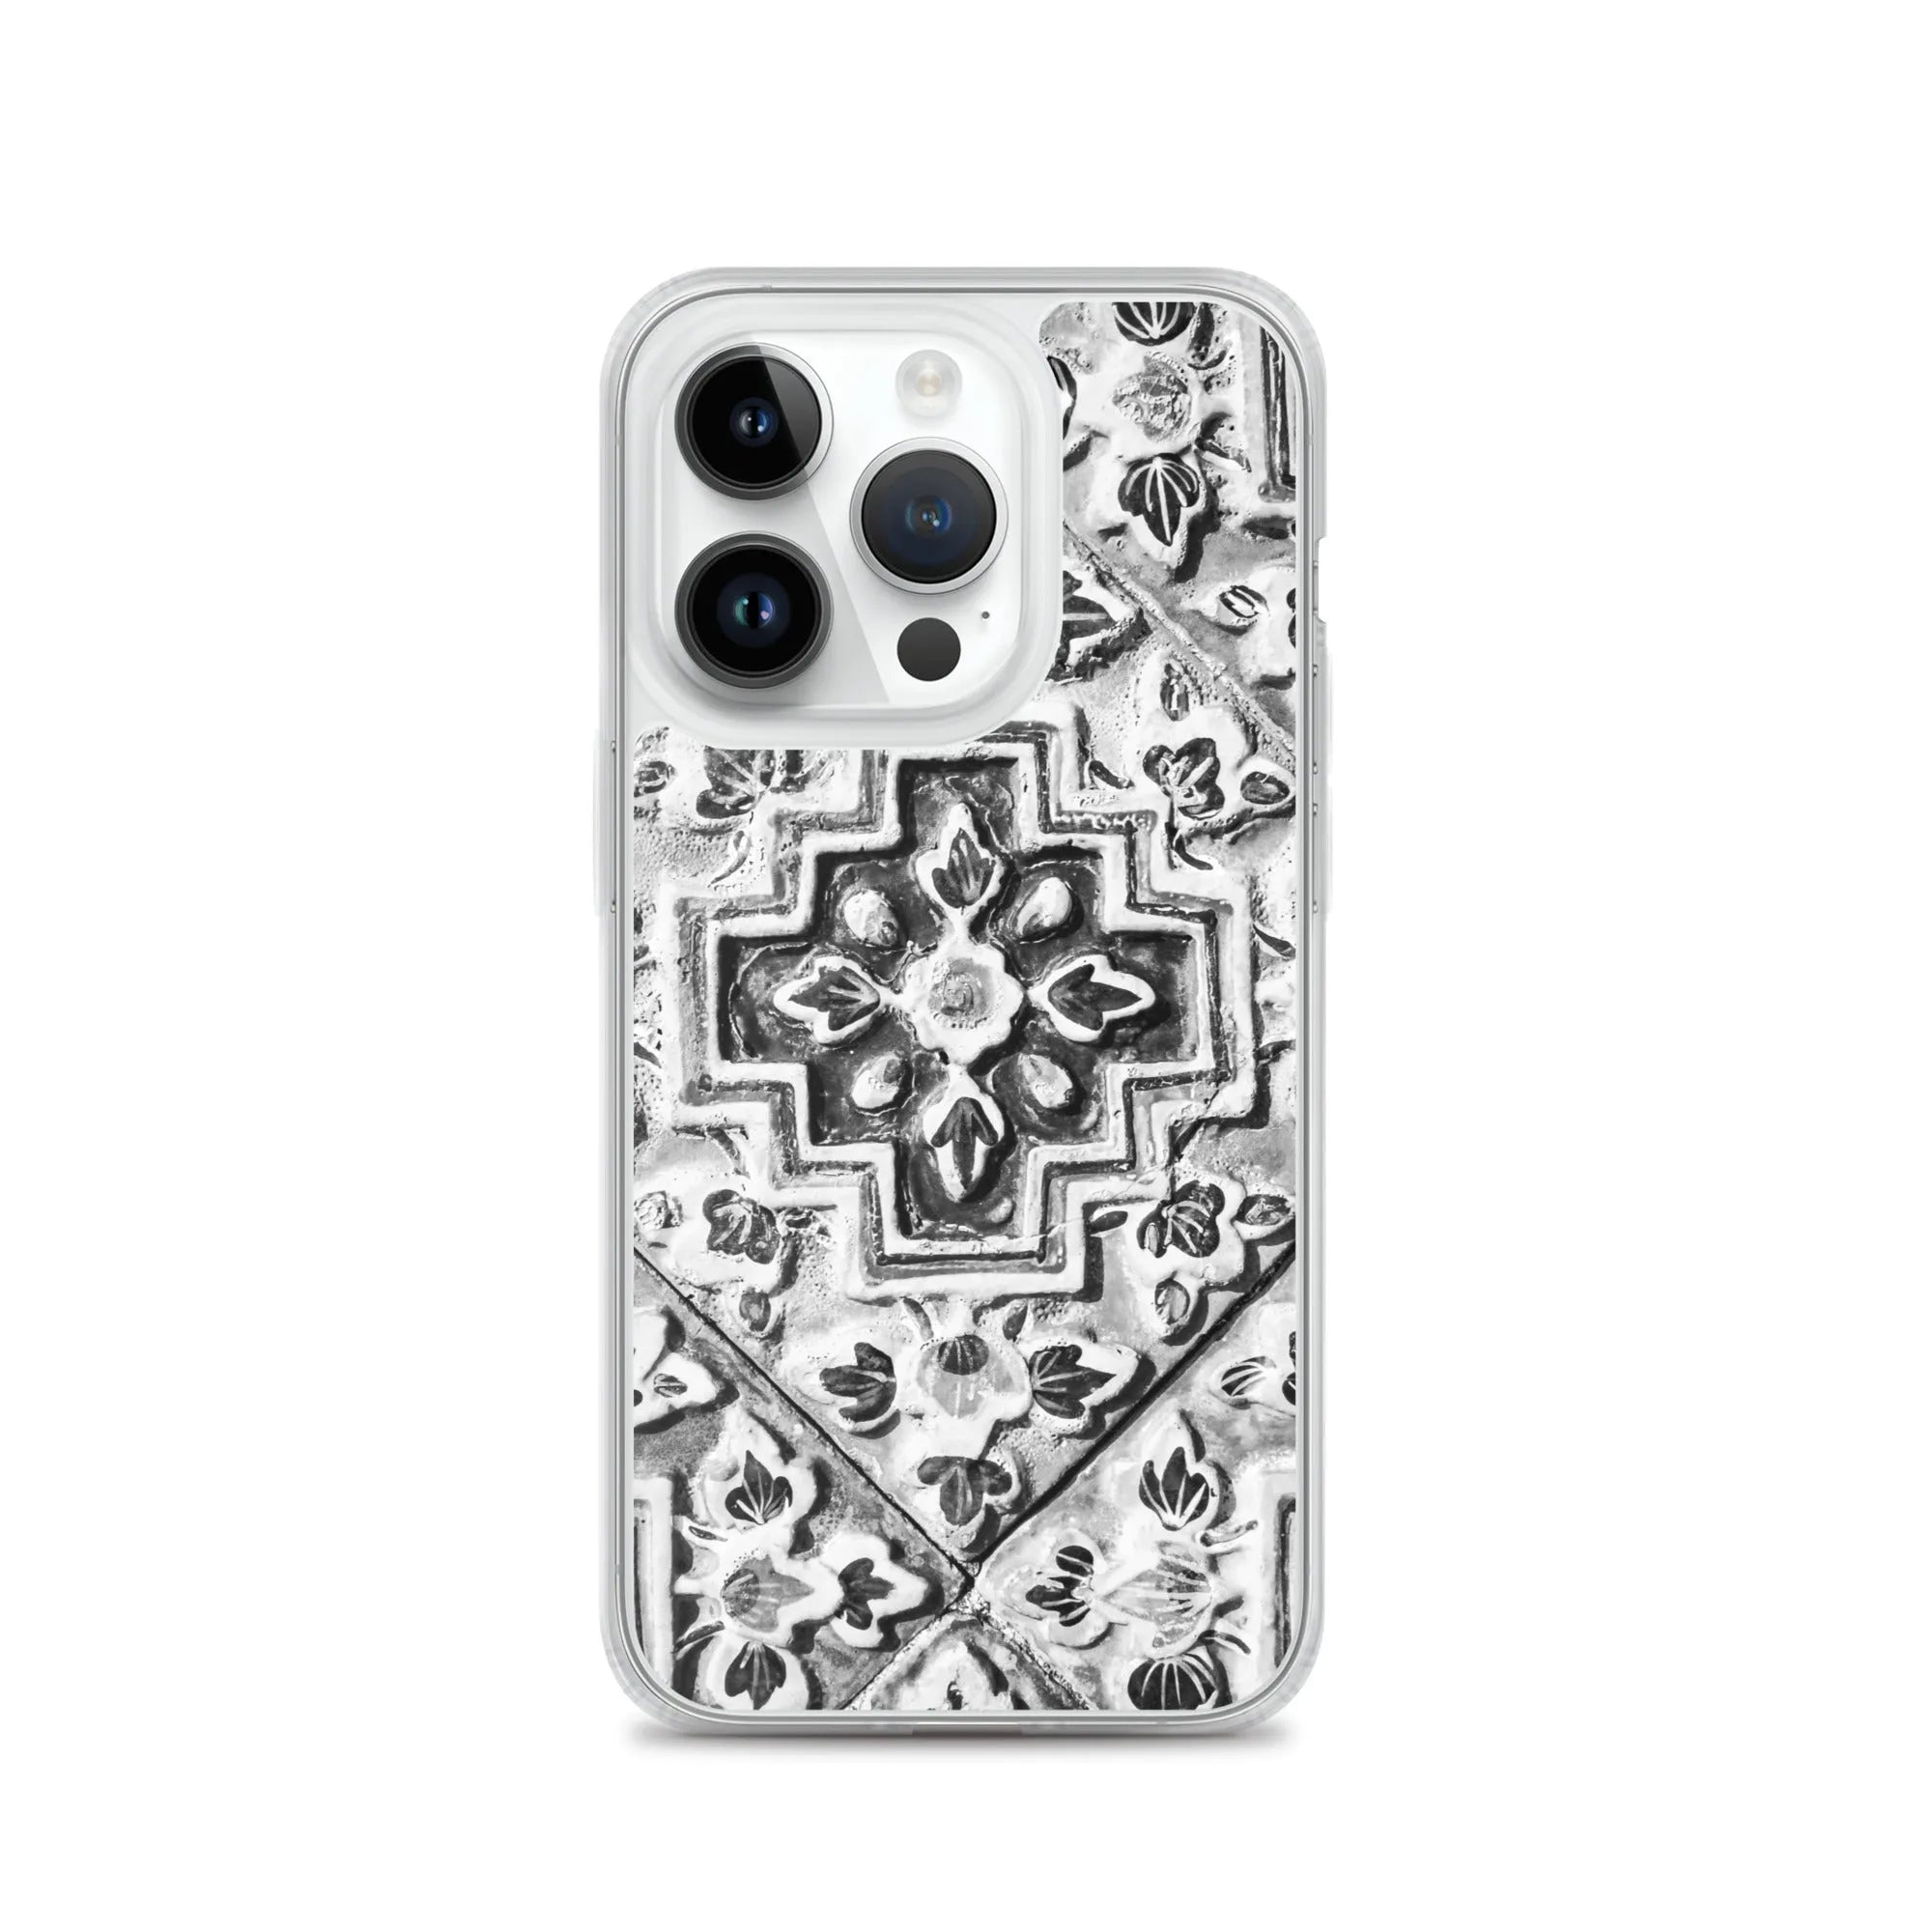 Tactile - Designer Travels Art Iphone Case - Black And White - Iphone 14 Pro - Mobile Phone Cases - Aesthetic Art